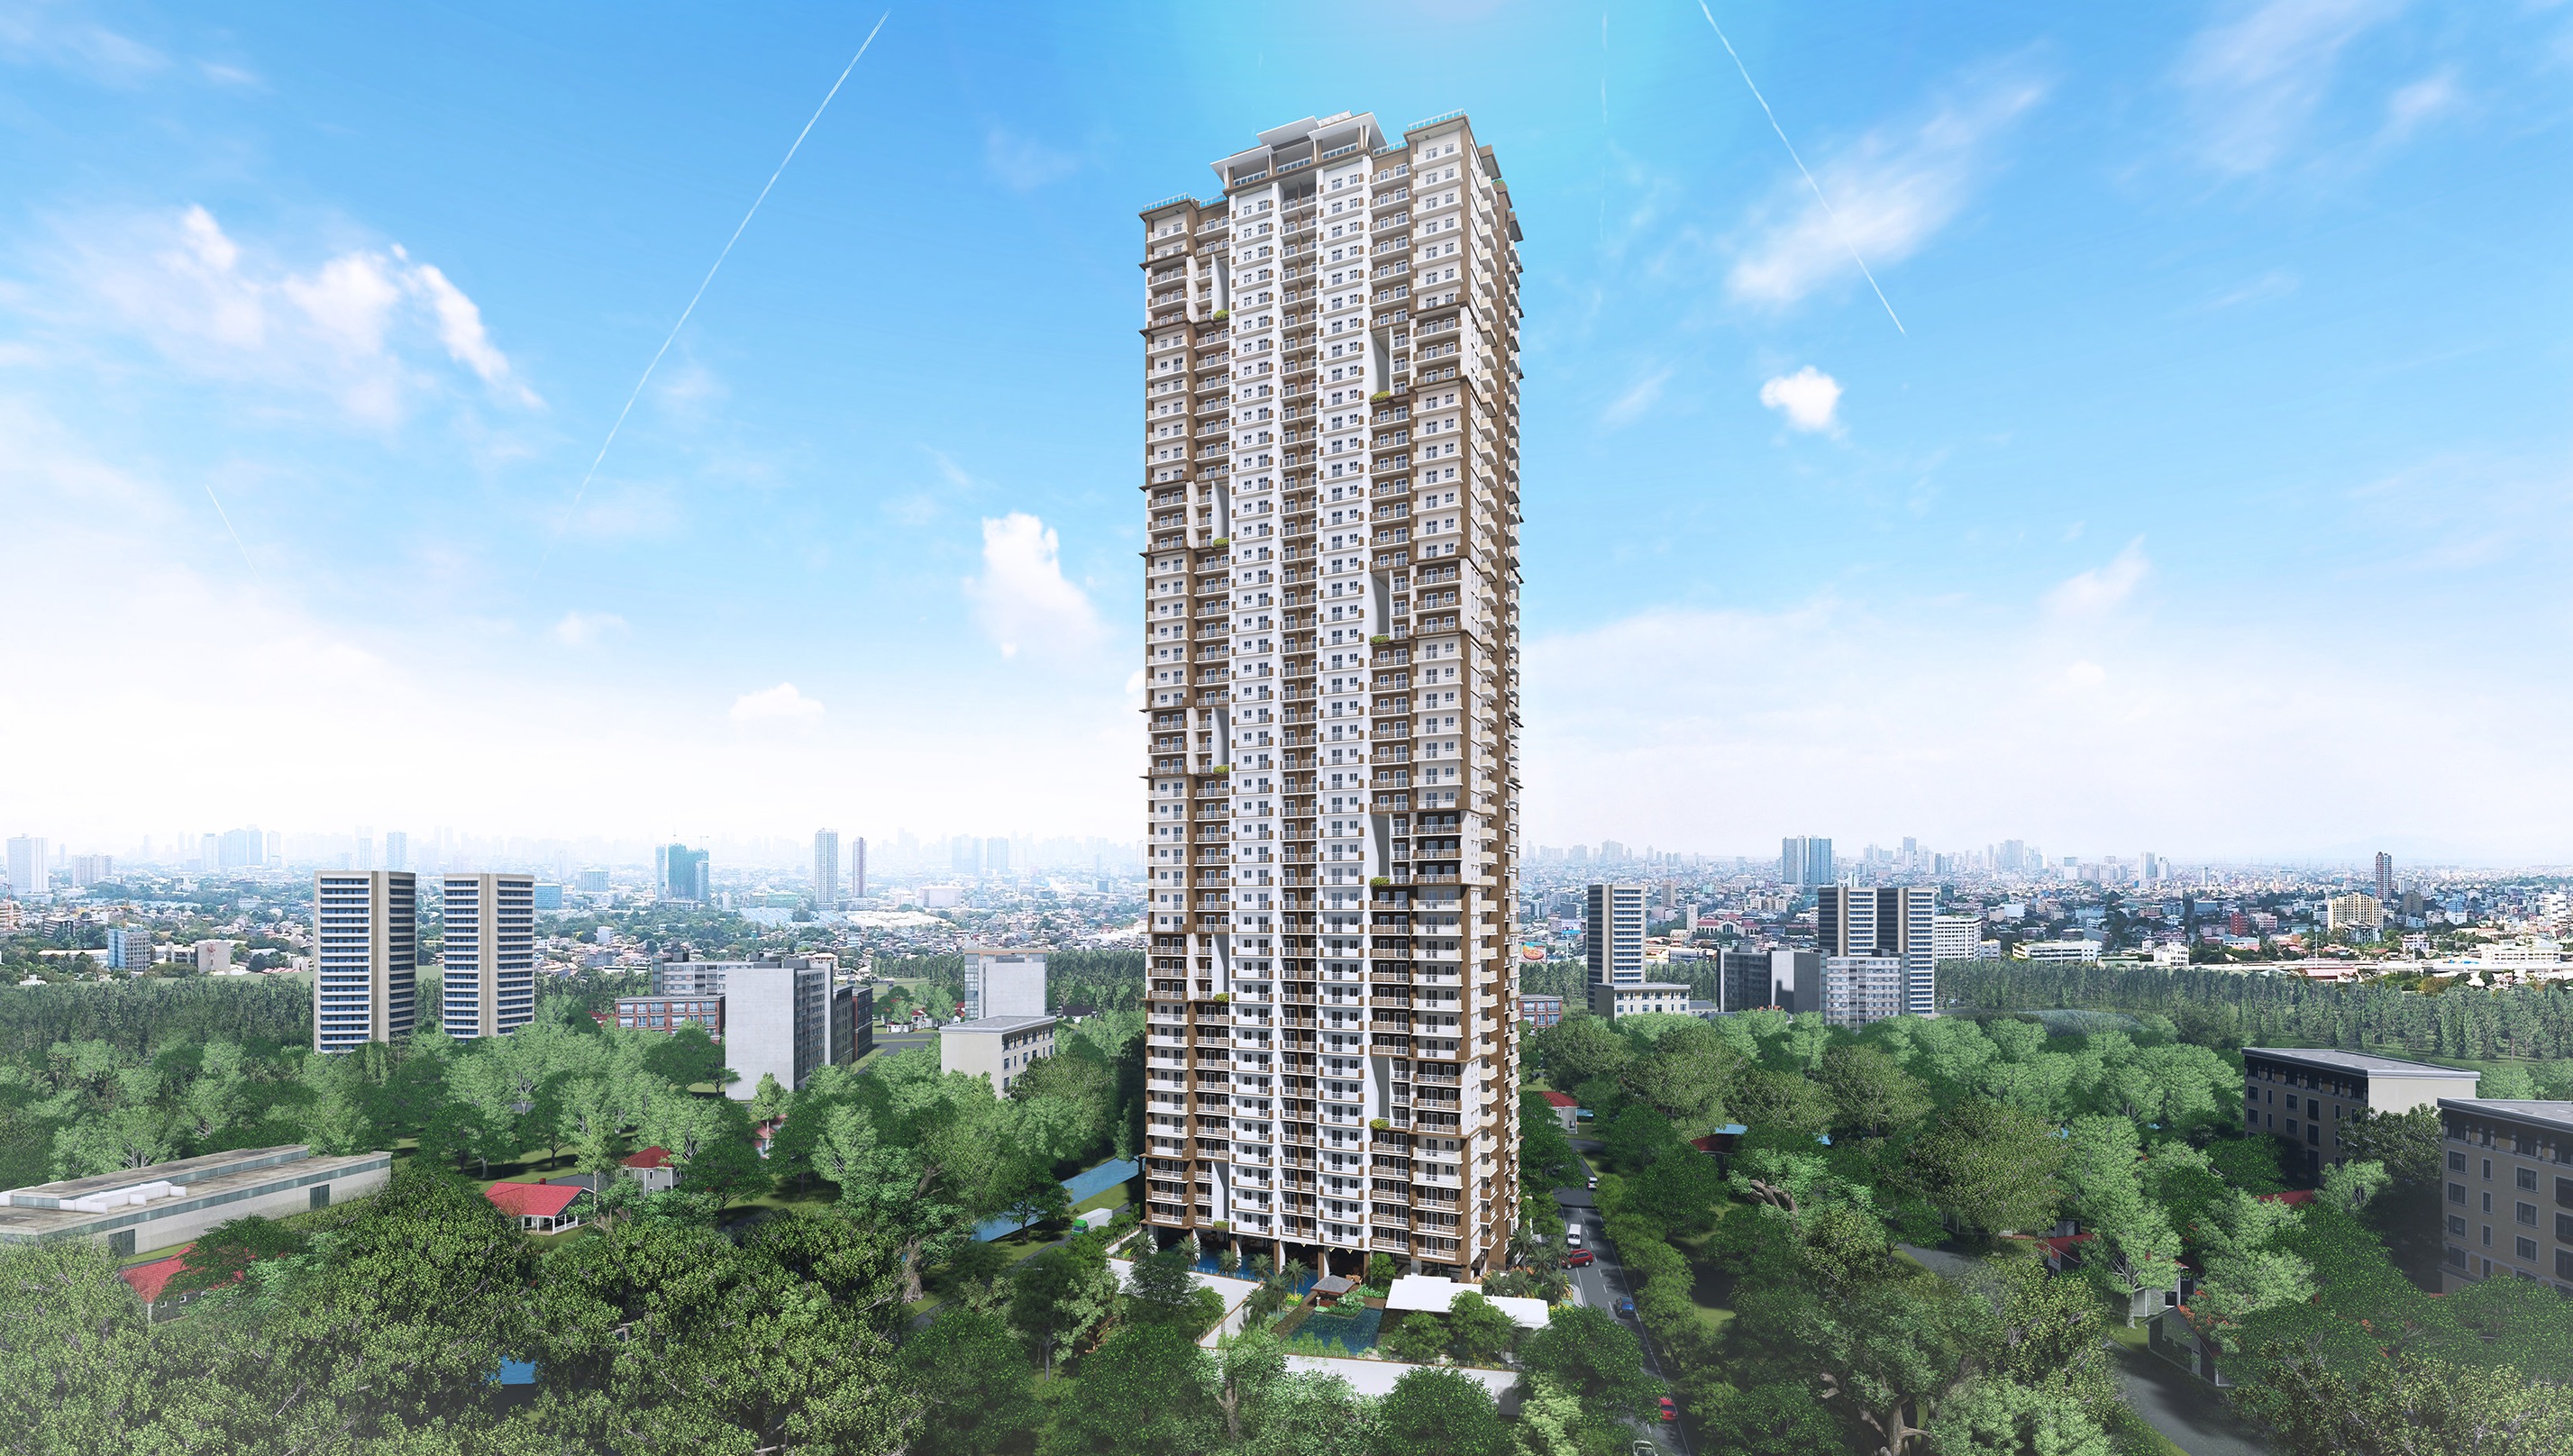 dmci-homes-condo-developments-well-served-by-skyway-stage-3-project-1611731253728